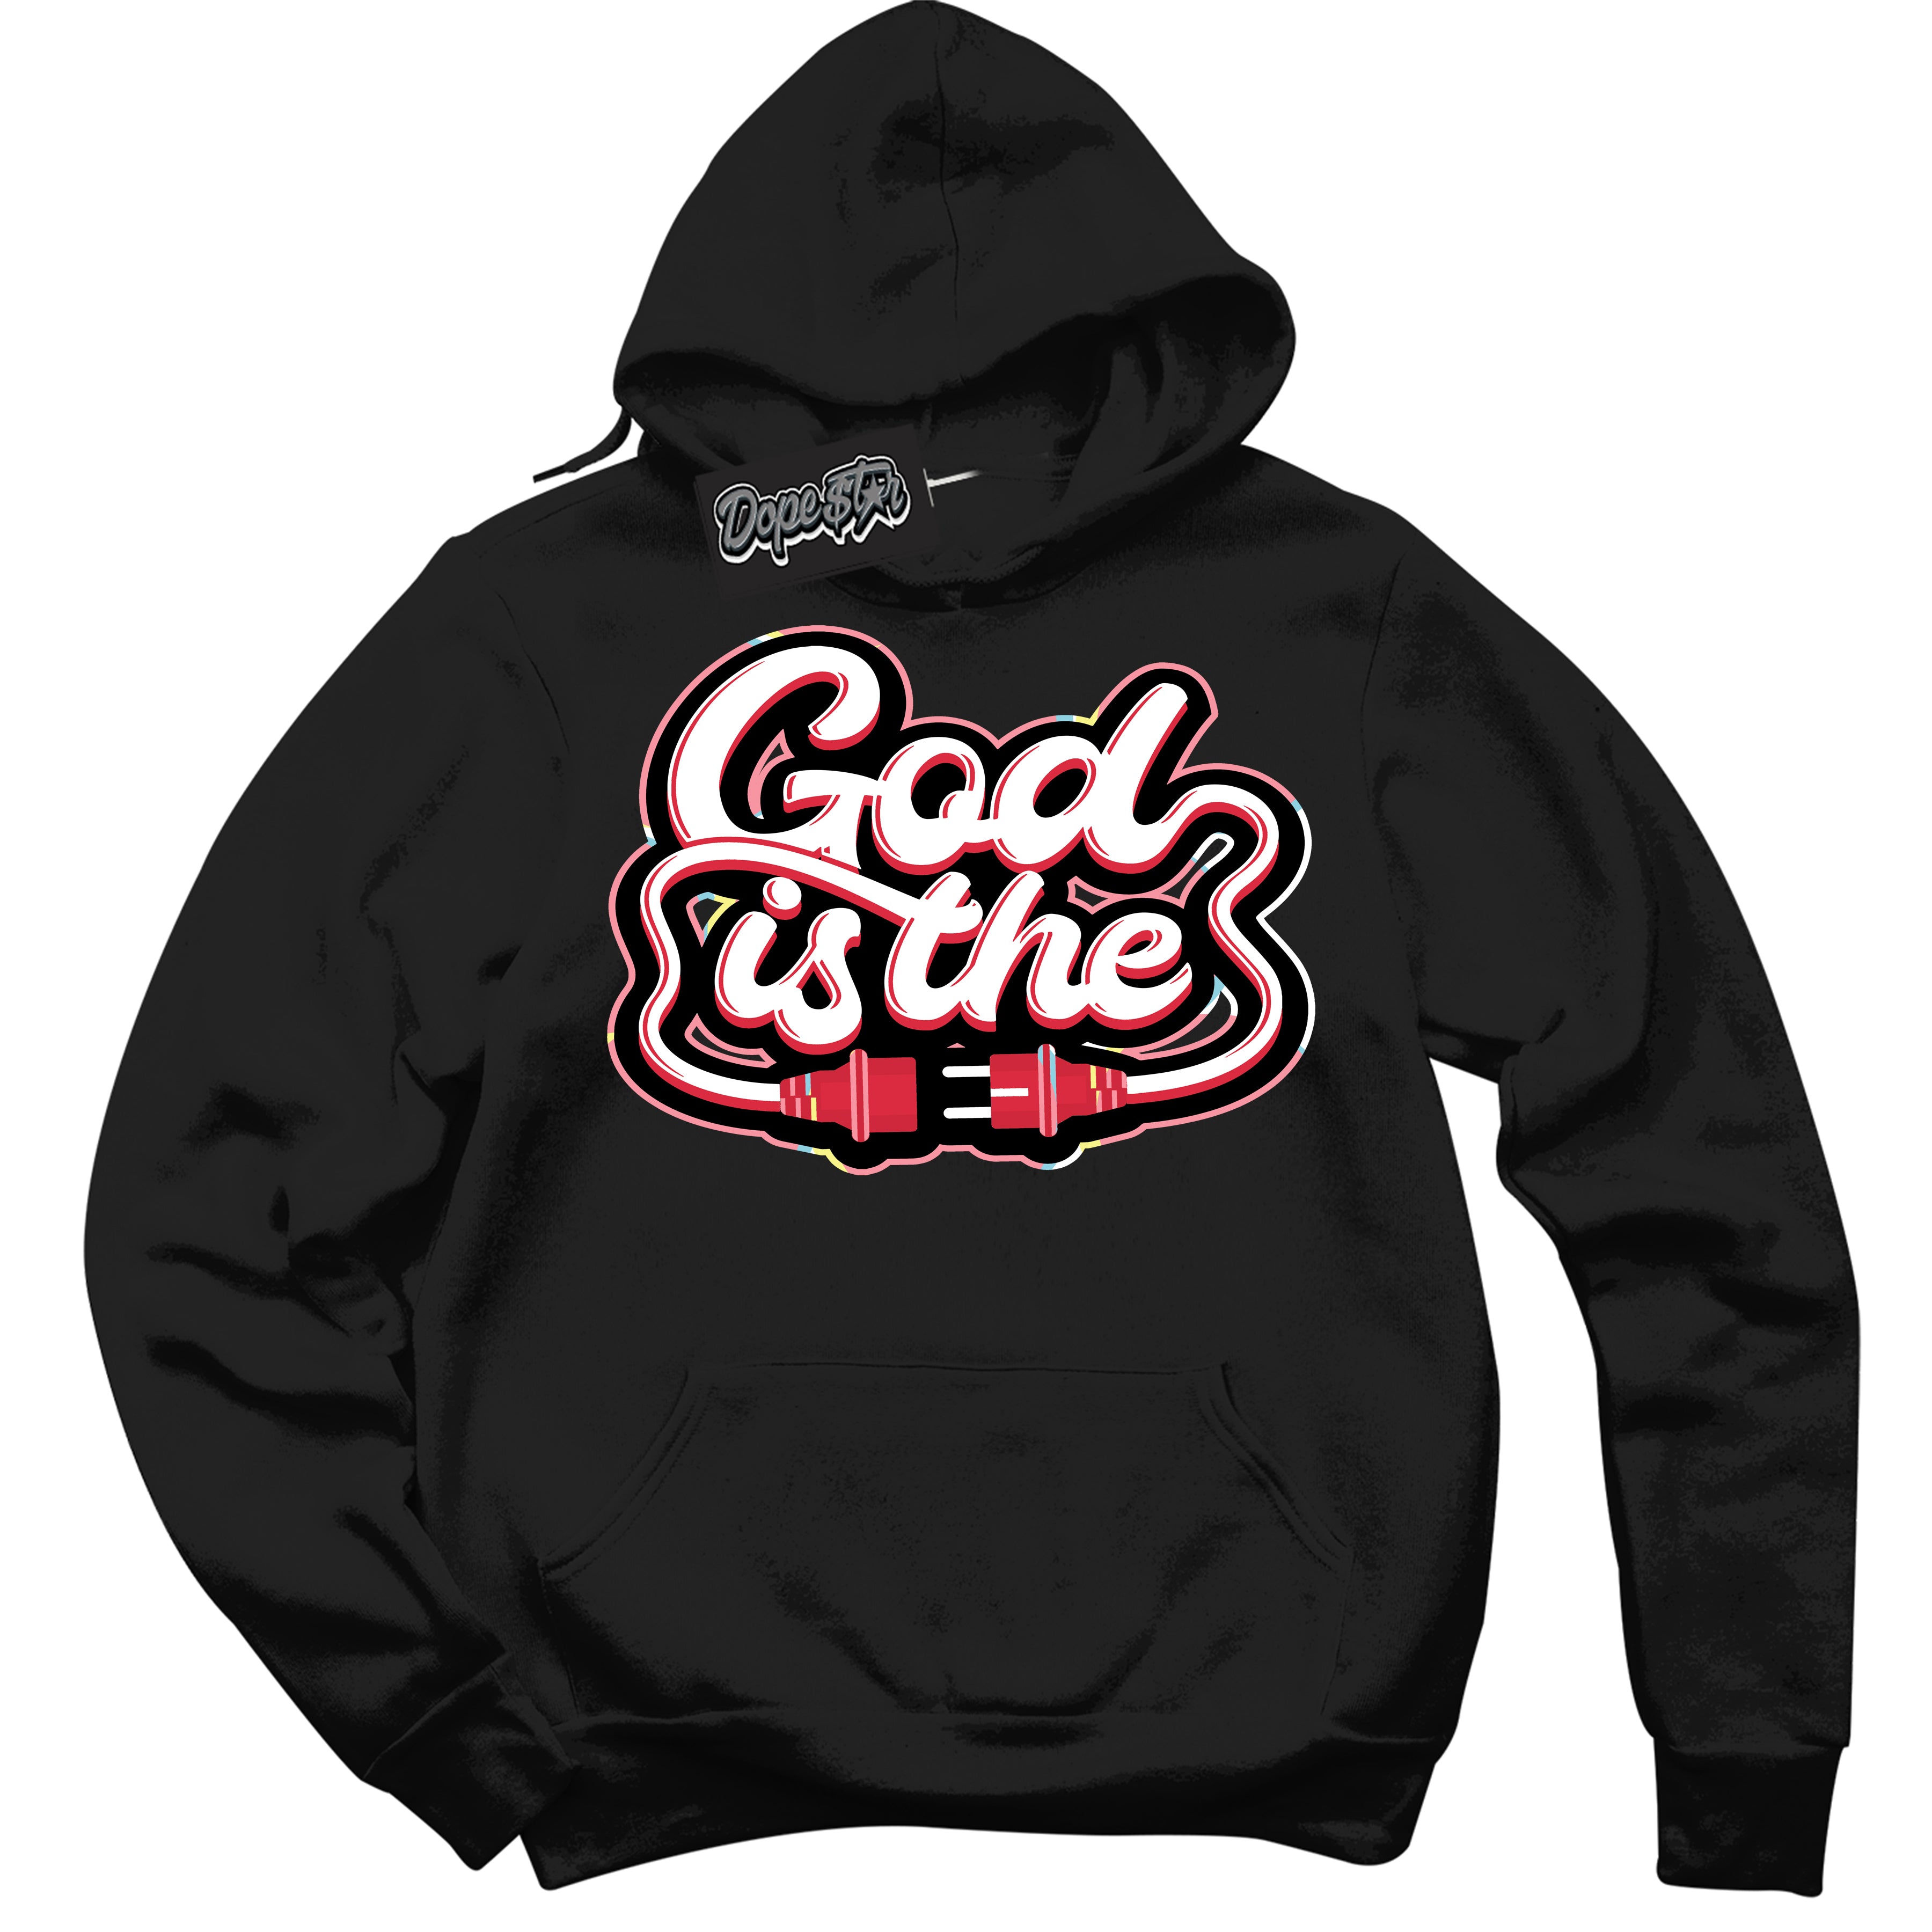 Cool Black Graphic DopeStar Hoodie with “ God Is The “ print, that perfectly matches Spider-Verse 1s sneakers